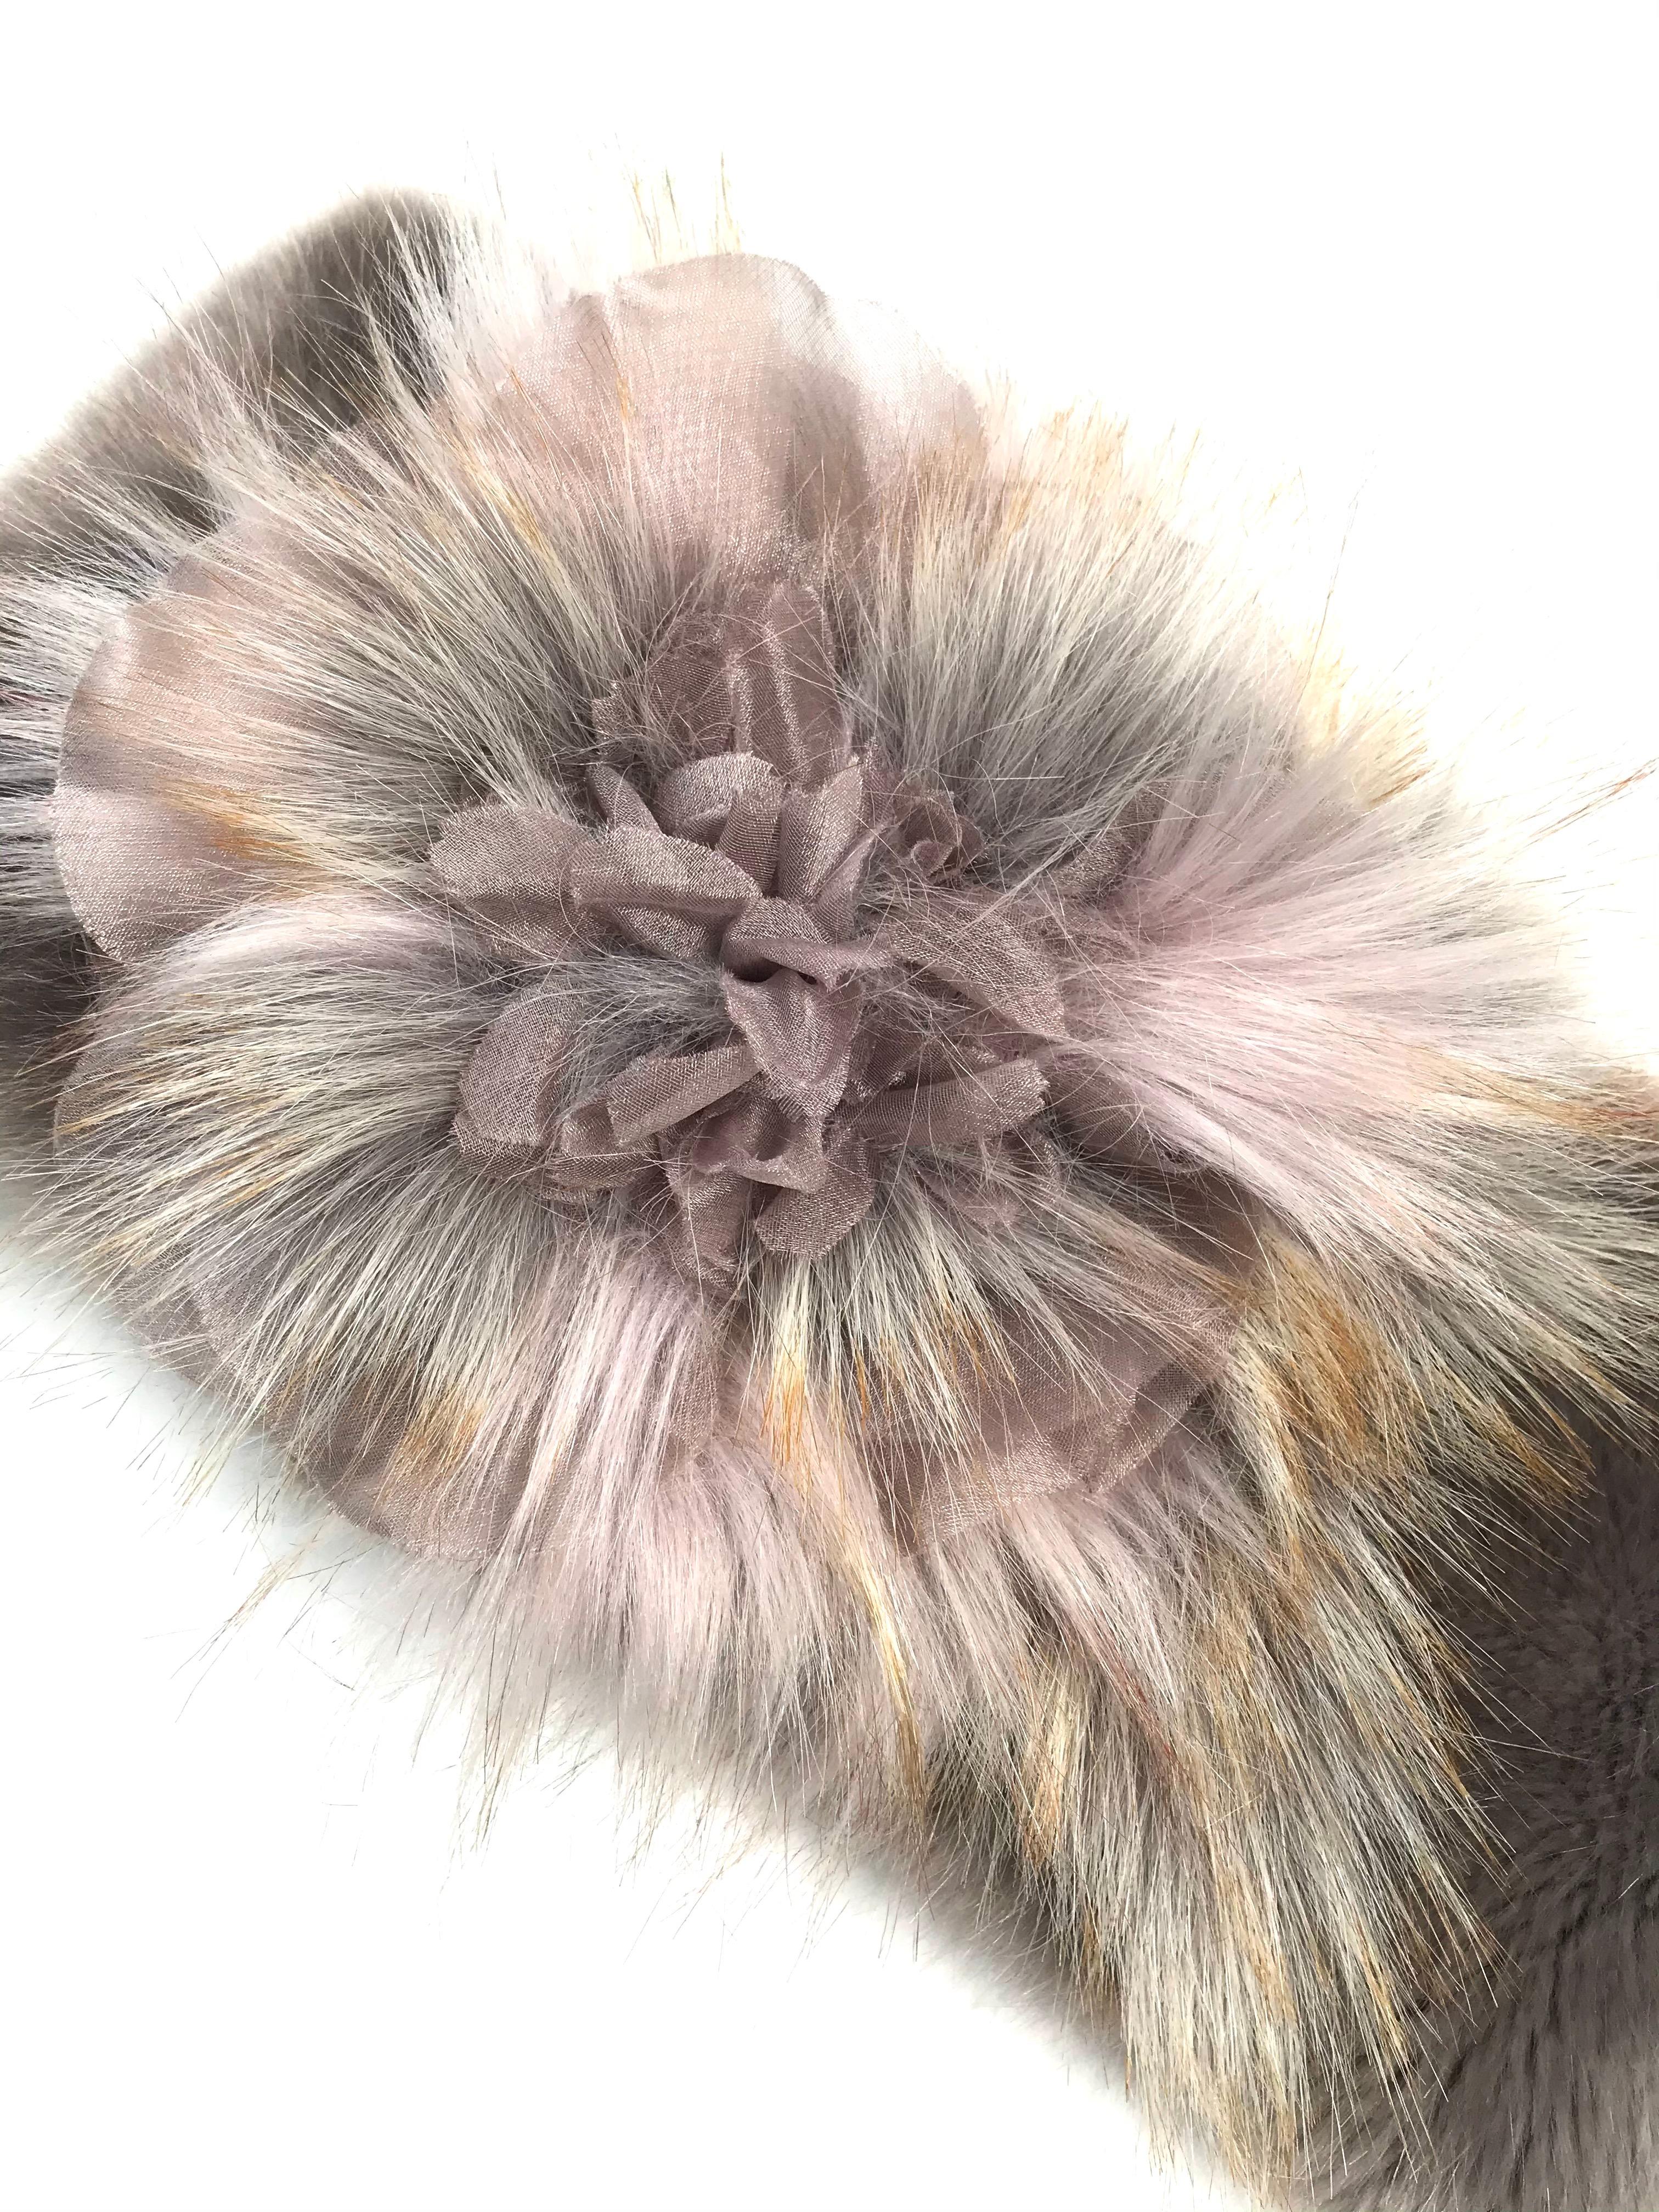 The Pelush faux fur neck warmer/hat is a one of a kind exclusive piece. Featuring the highest quality man made pelage, this elegant and unique scarf in mauve and pink tones is a stunning replica of the mink and fox fur. Wear it around your neck or